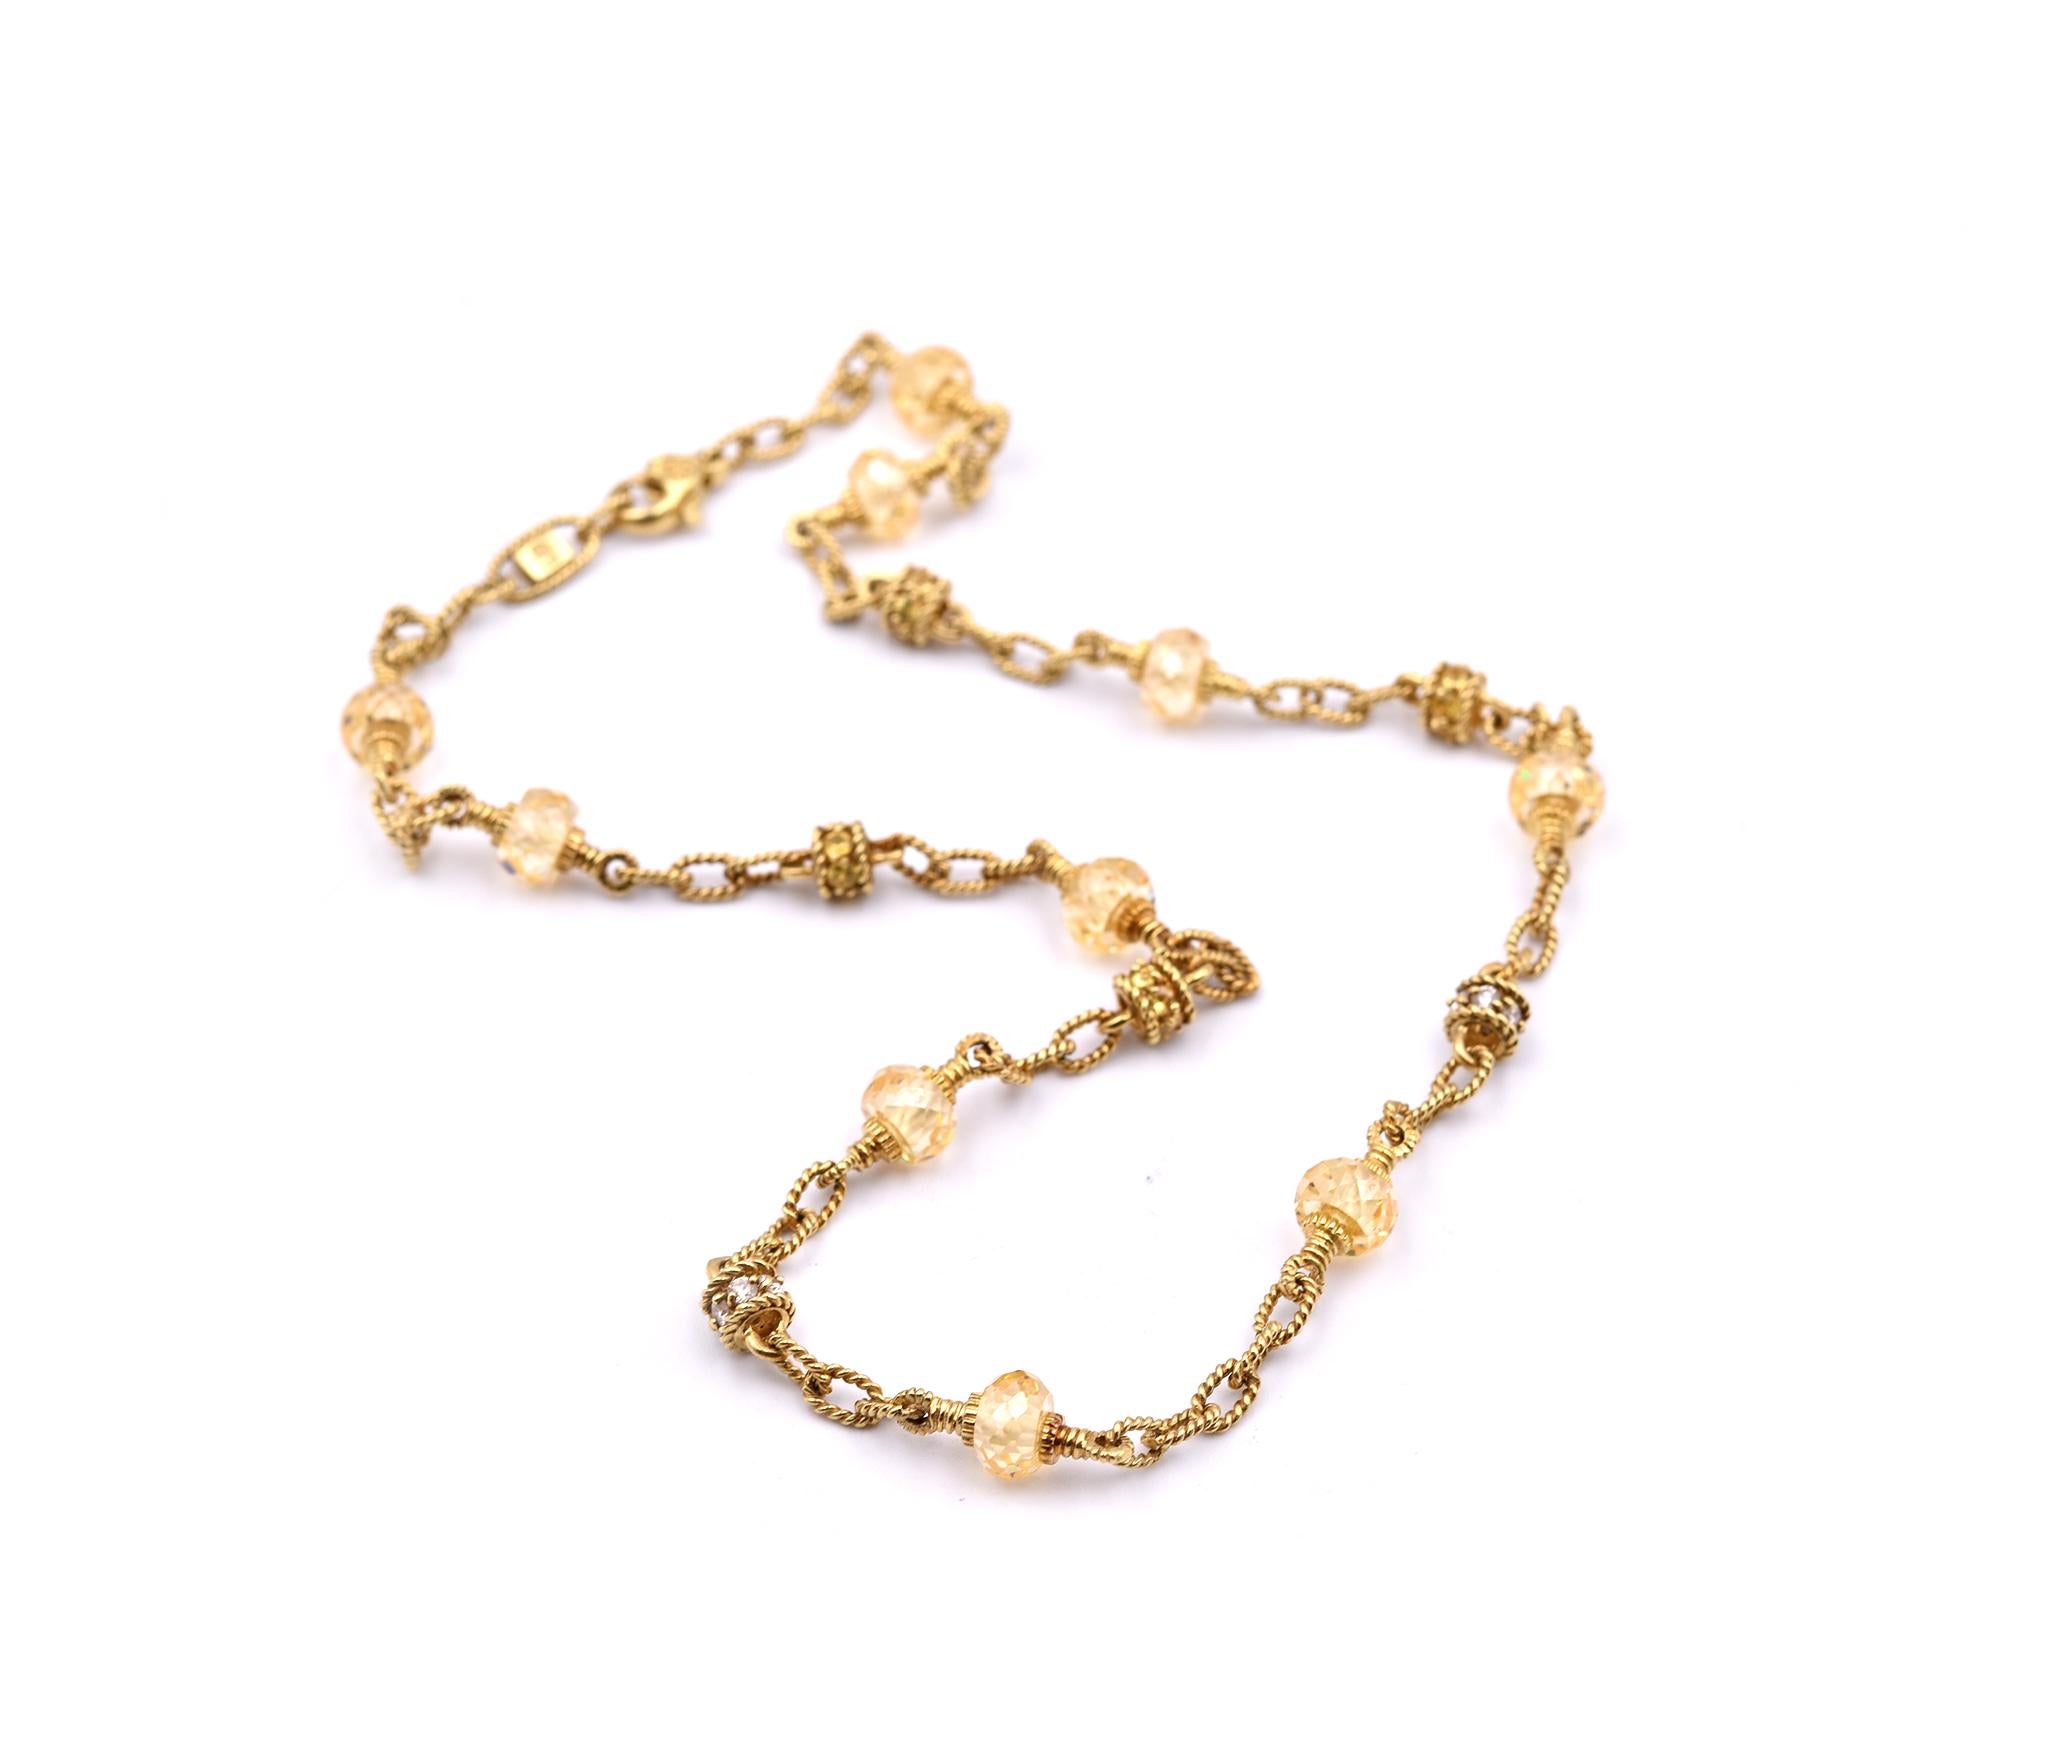 Designer: Judith Ripka
Material: 18k yellow gold
Dimensions: necklace is 16-inches long
Weight: 27.13 grams
